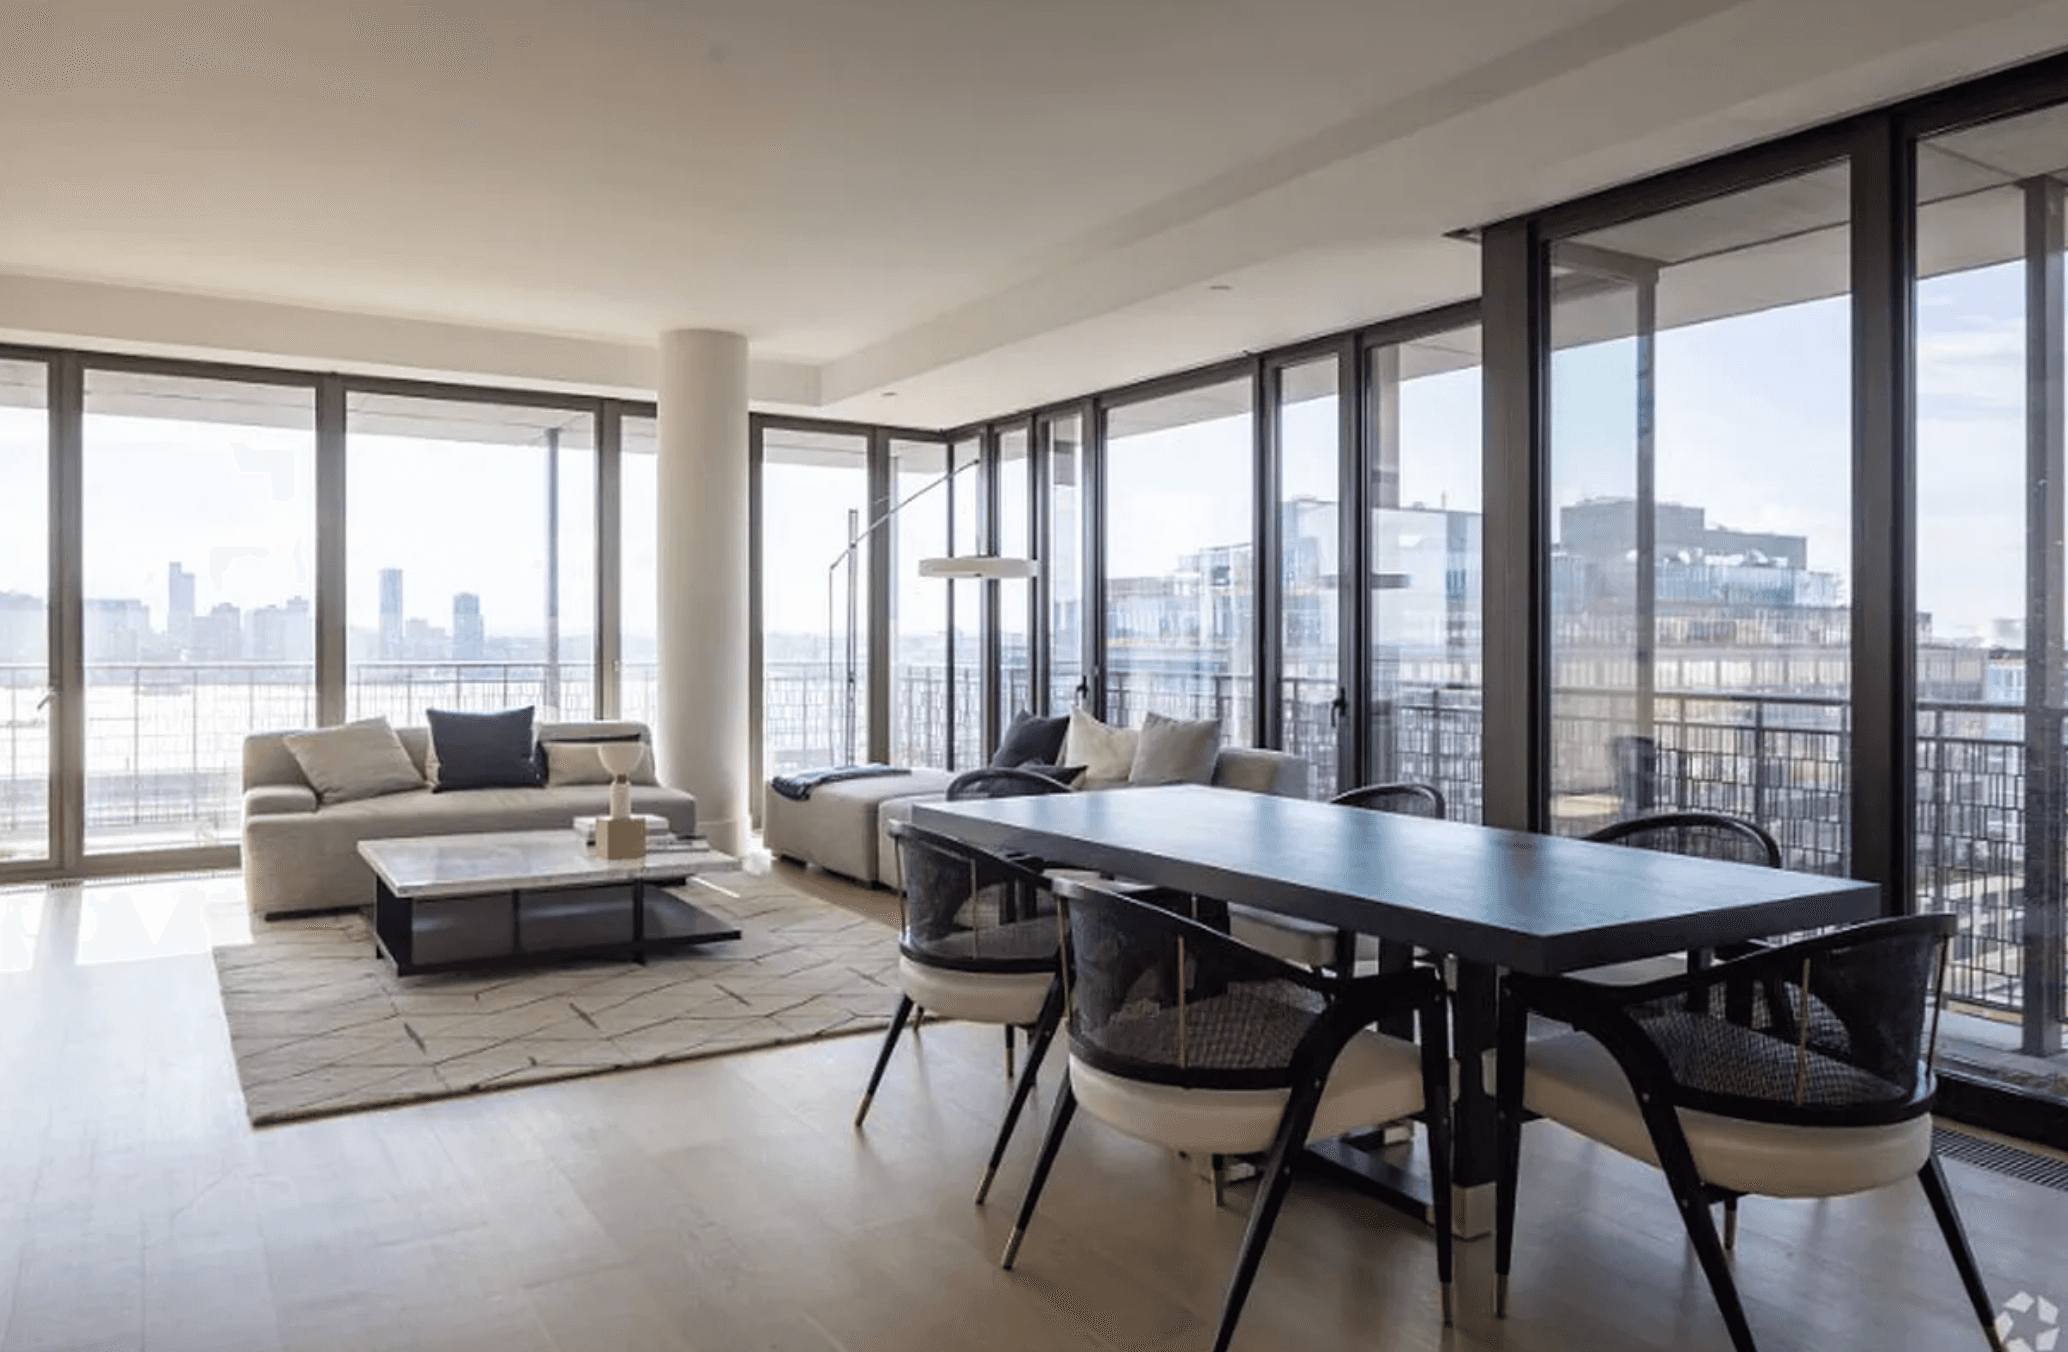 Exquisite Views at this Hudson yards Two Bed Apartment